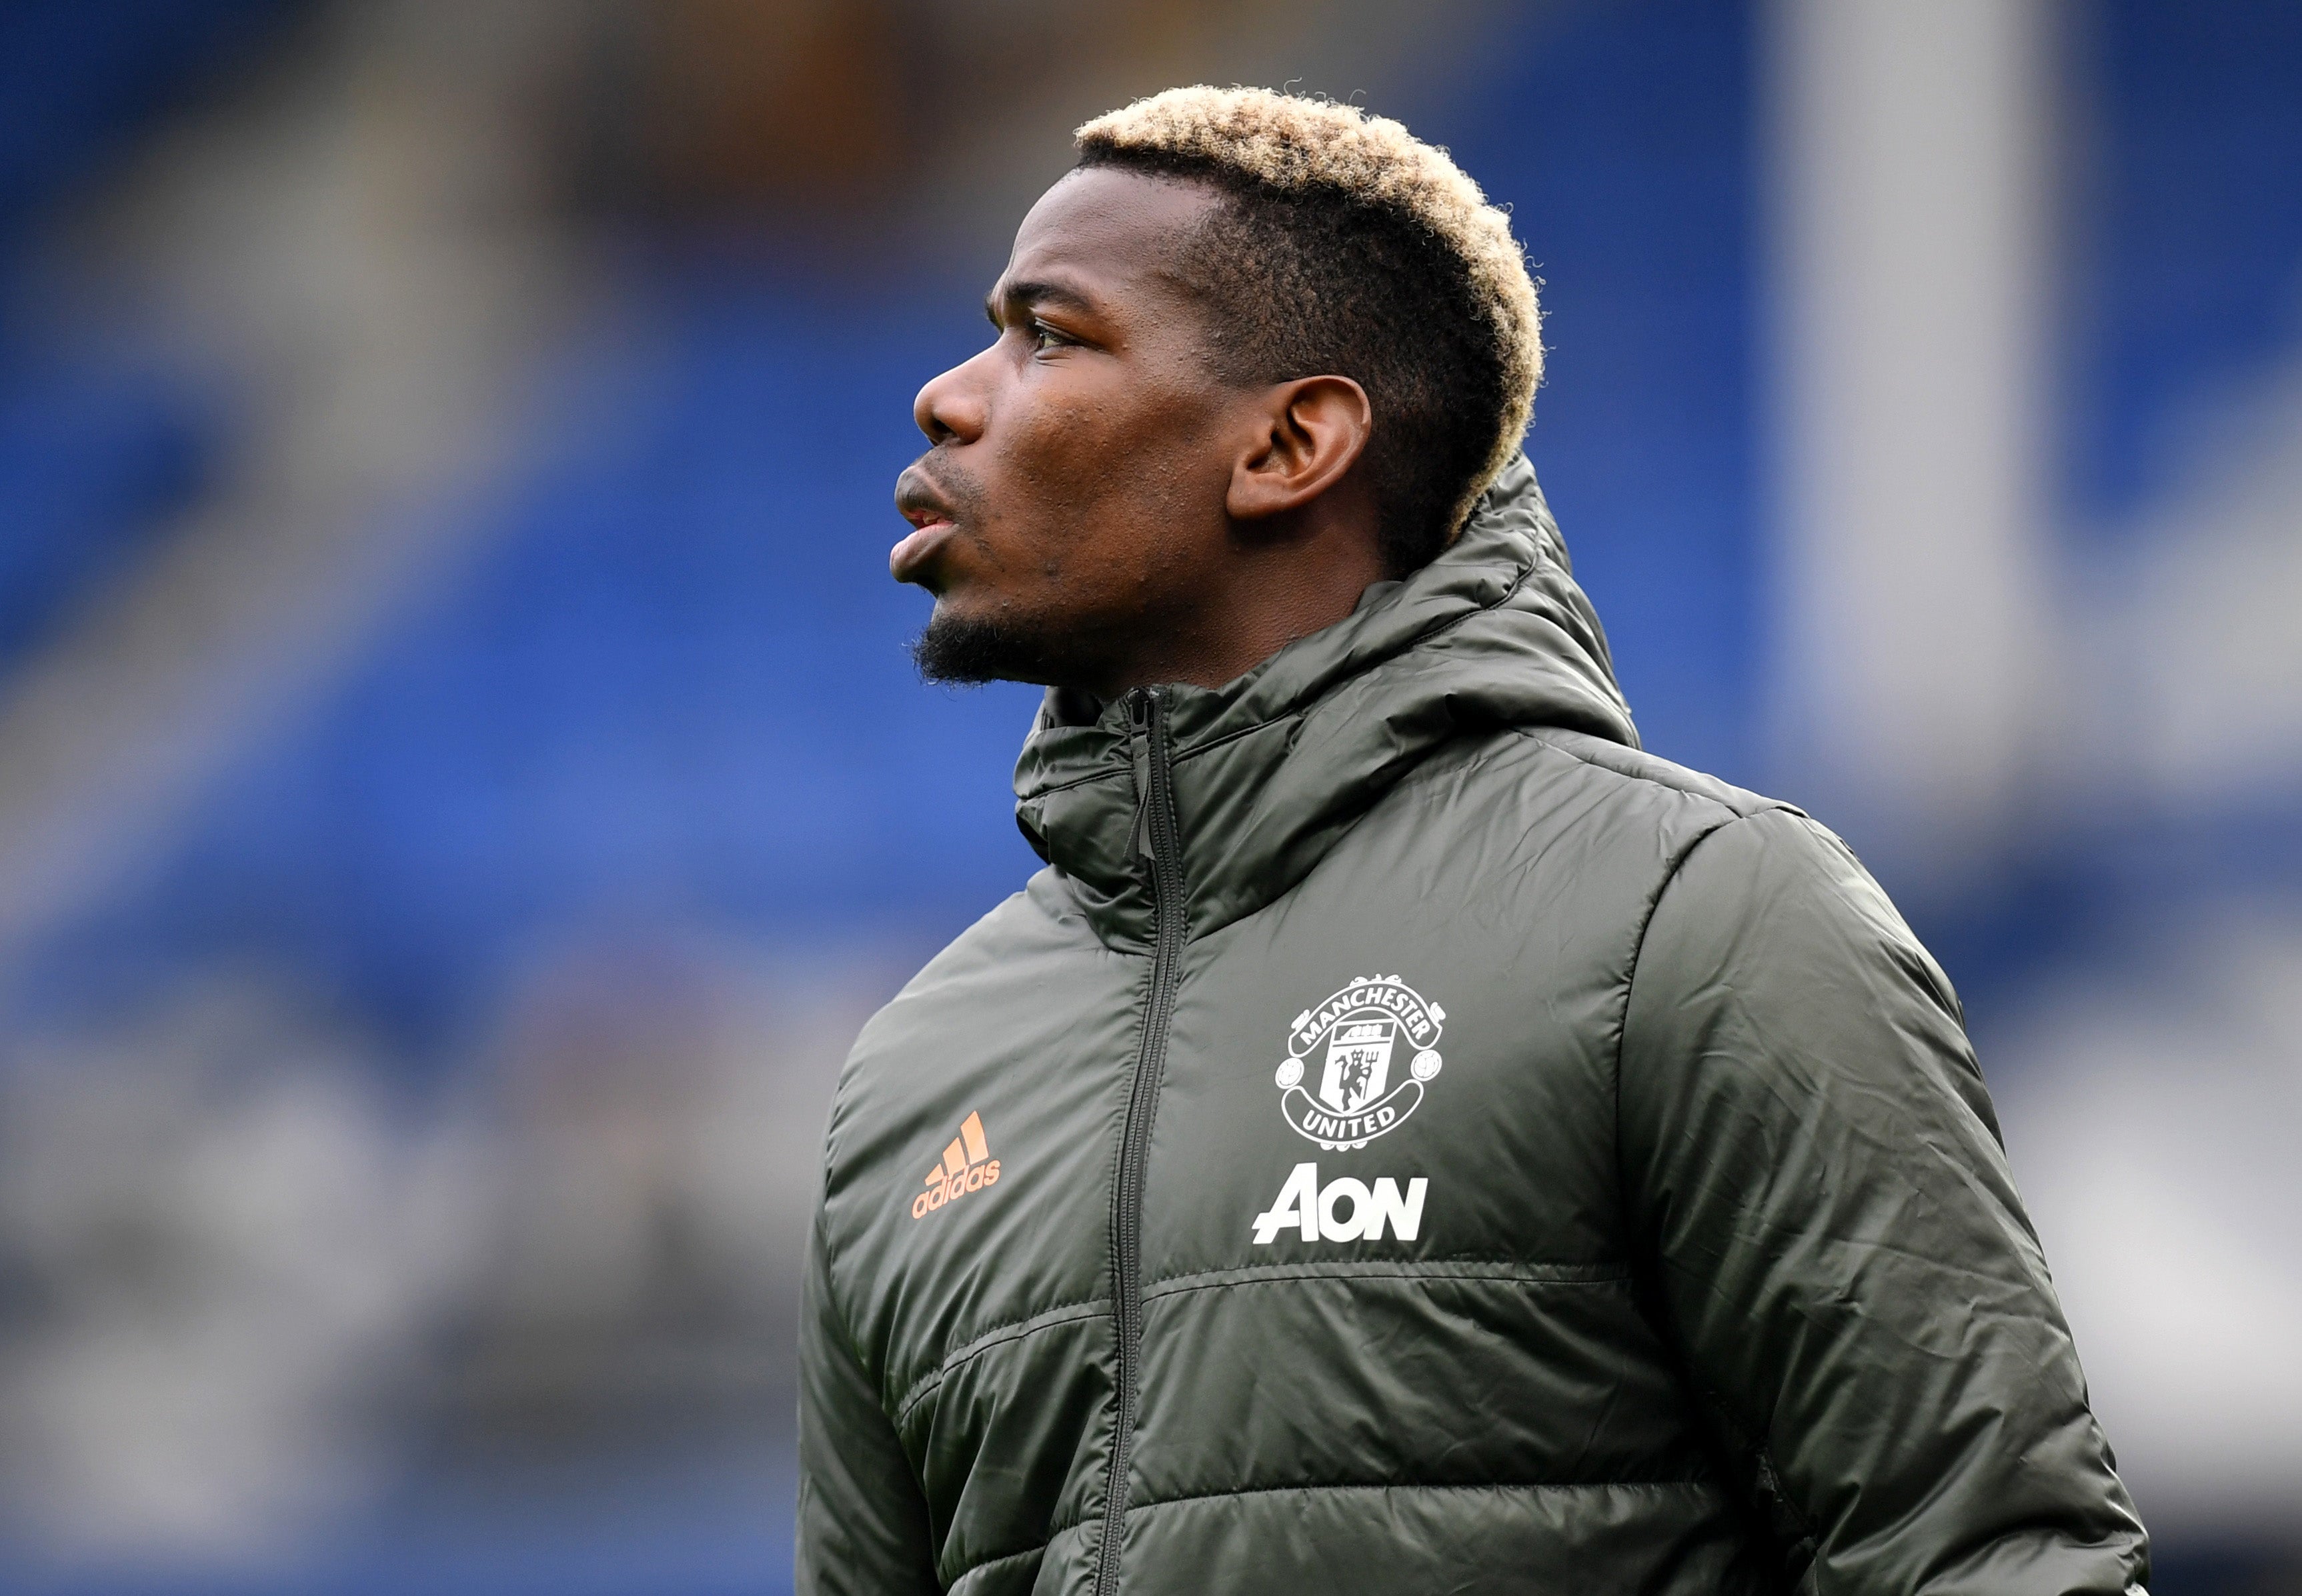 Paul Pogba has struggled to impose himself on the team at Man United